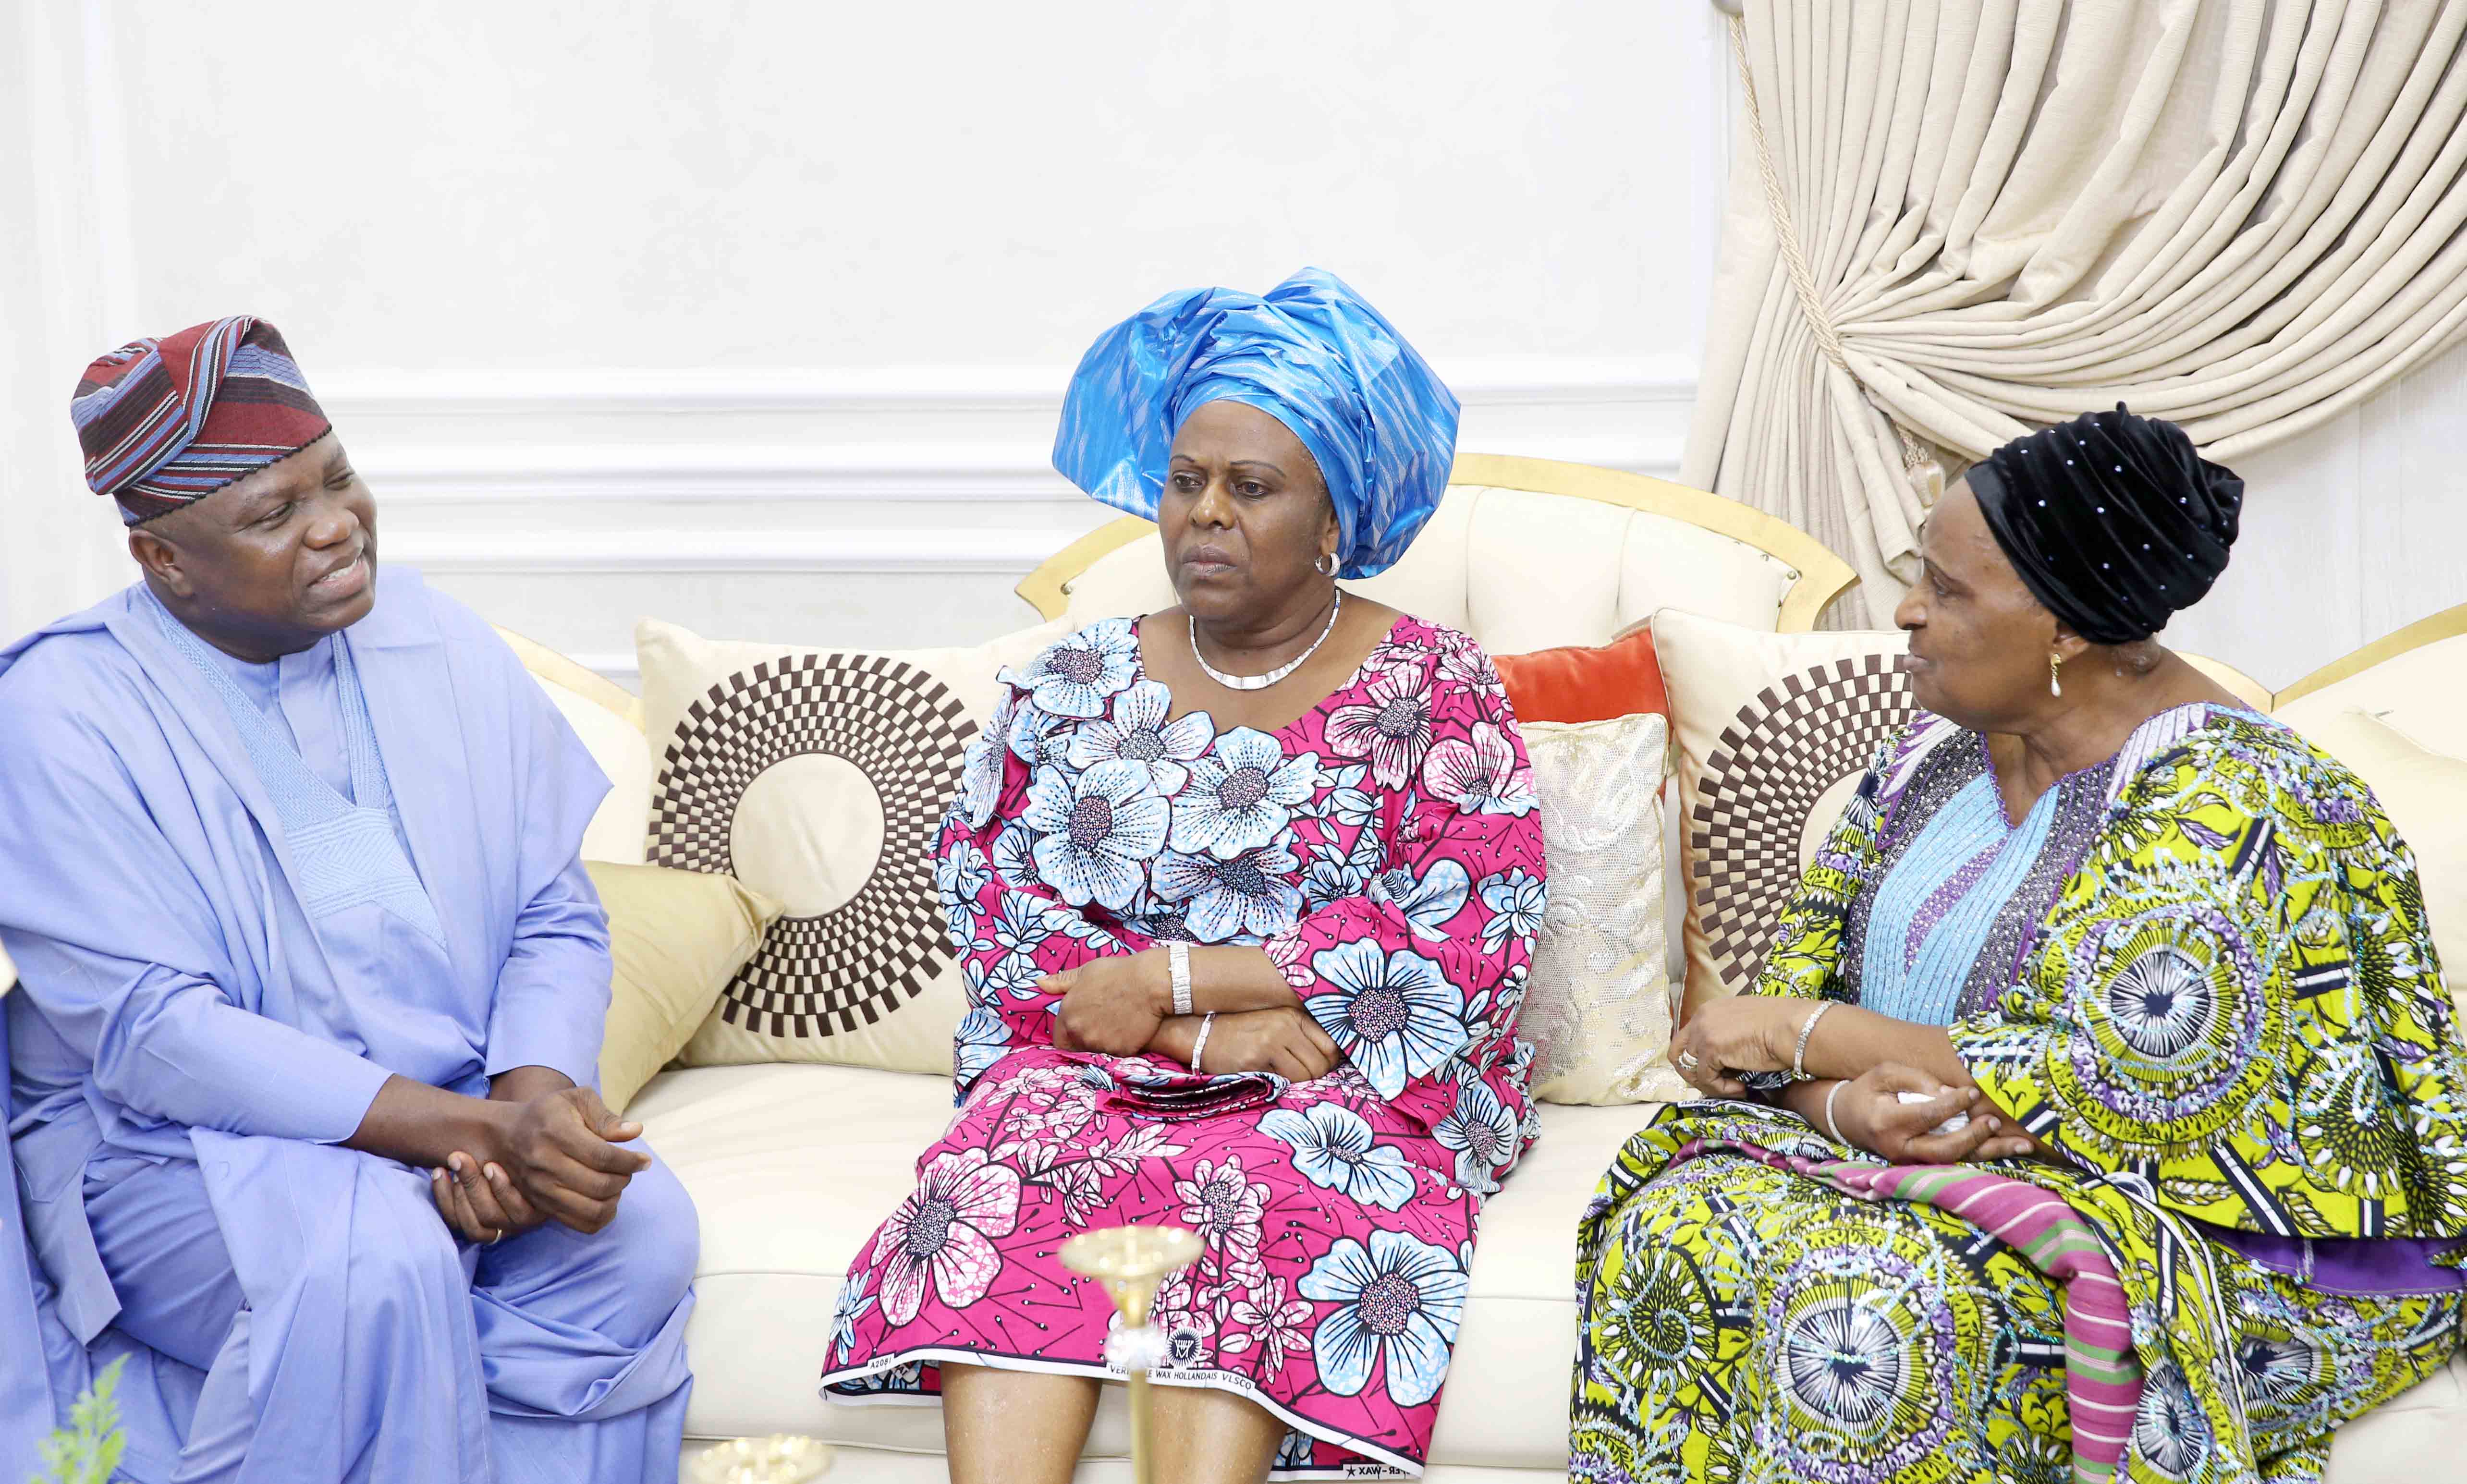 Lagos State Governor, Mr. Akinwunmi Ambode, with Ambassador Tokunbo Awolowo-Dosunmu and daughter of Chief Obafemi Awolowo, Mrs. Omotola Oyediran during their courtesy visit to the Governor at the Lagos House, Ikeja, on Tuesday, September 26, 2017.